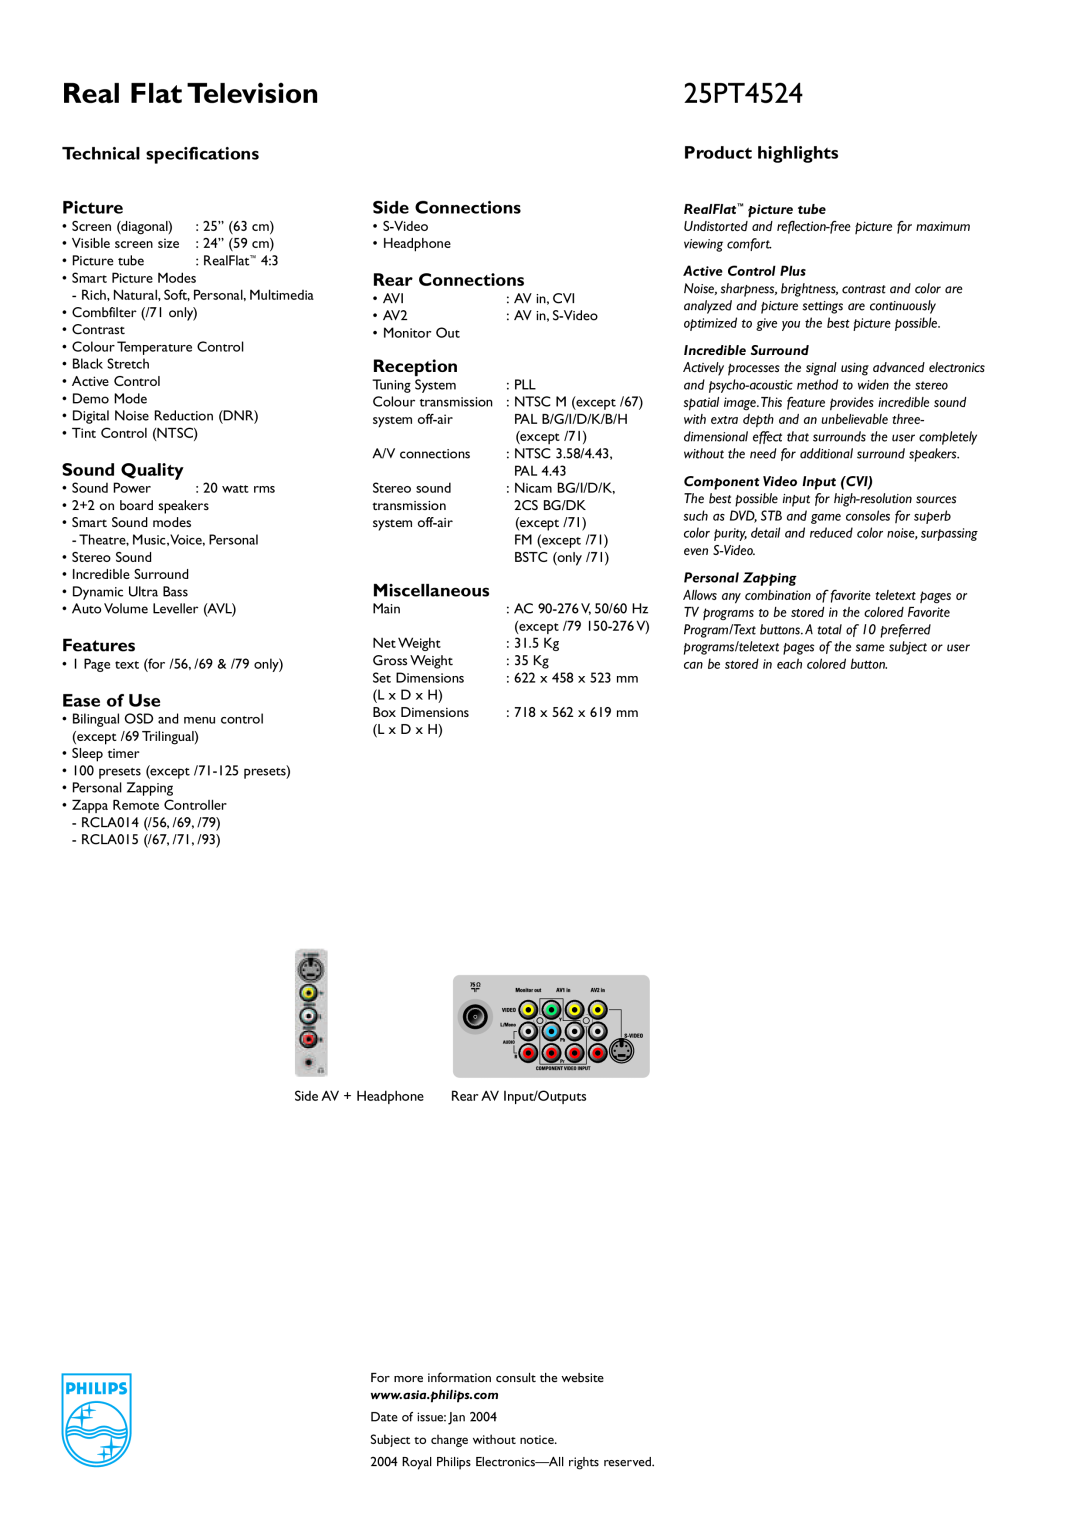 Philips 25PT4524 Real Flat Television, Technical specifications Picture, Sound Quality, Features, Ease of Use, Reception 